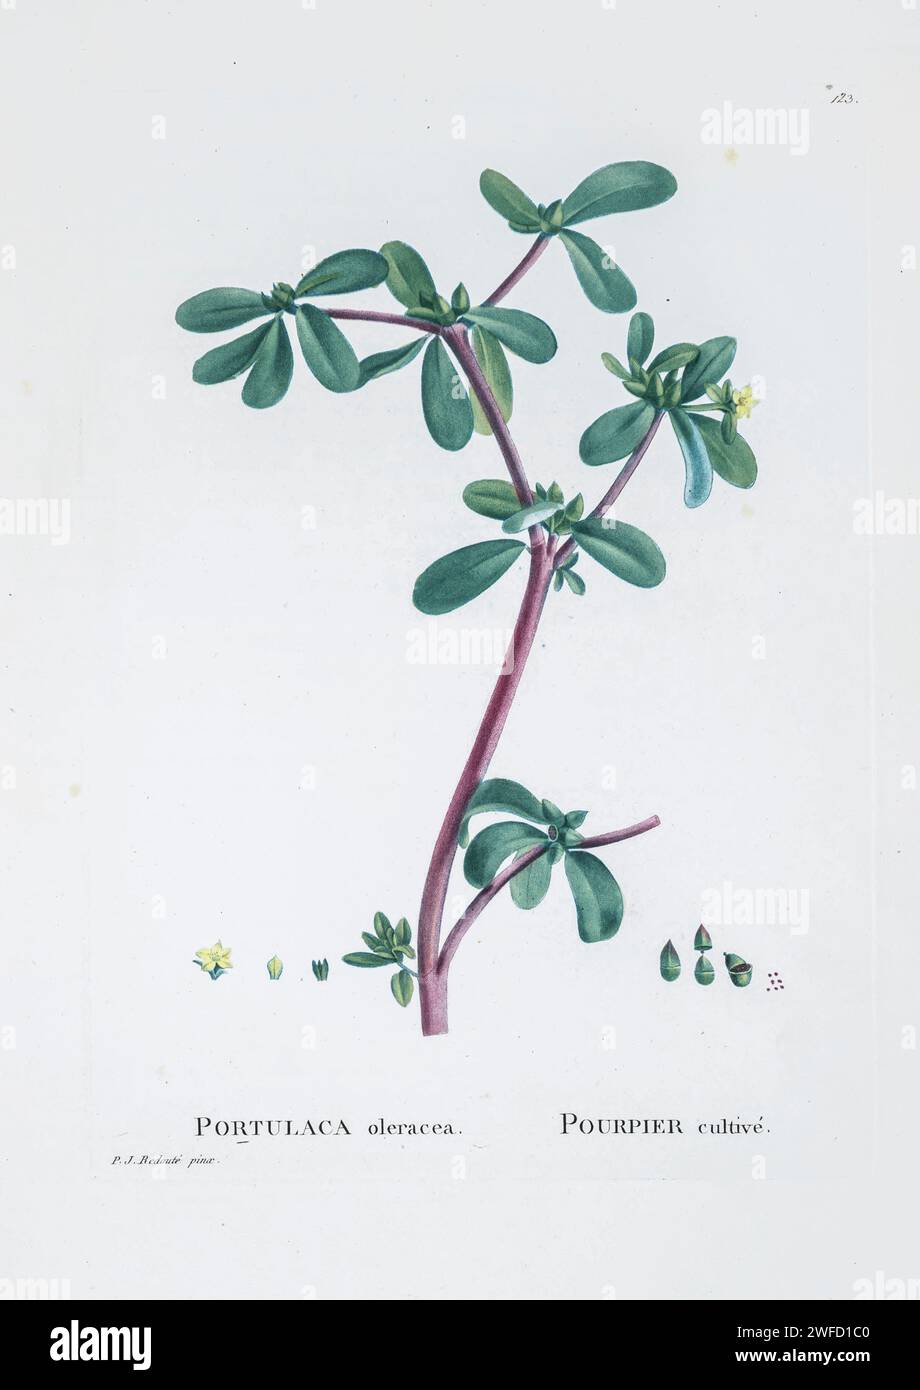 Portulaca oleracea from History of Succulent Plants [Plantarum historia succulentarum / Histoire des plantes grasses] painted by Pierre-Joseph Redouté and described by Augustin Pyramus de Candolle 1799 Portulaca is a genus of flowering plants in the family Portulacaceae, and is the type genus of the family. With over 100 species, it is found in the tropics and warm temperate regions. Stock Photo